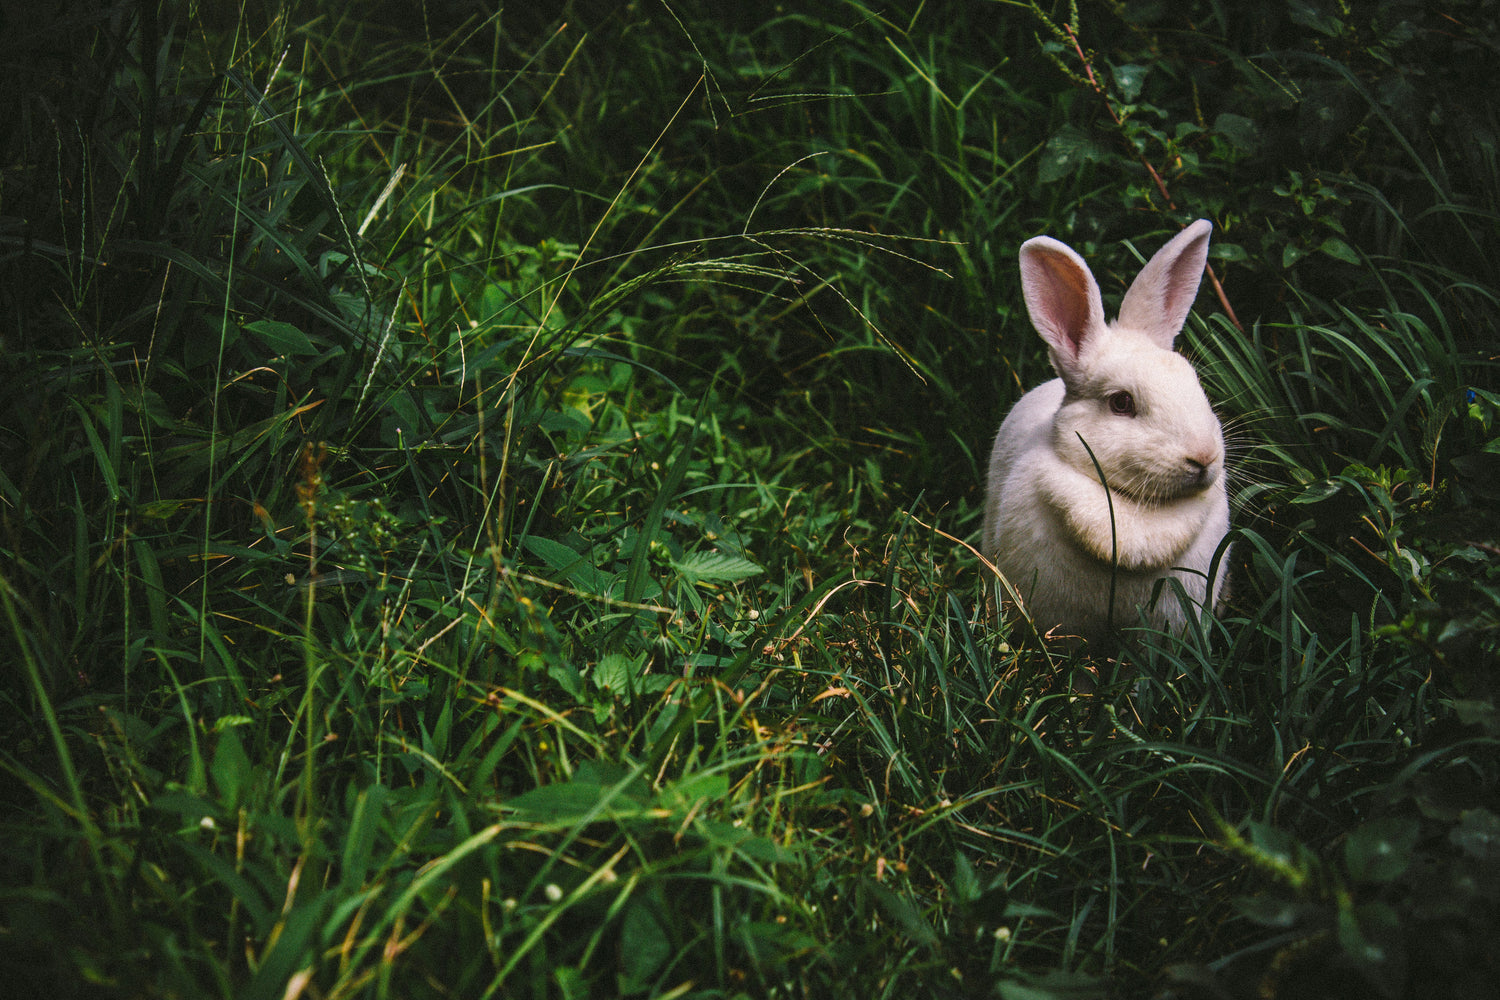 How to identify cruelty-free products: your guide to ethical beauty choices